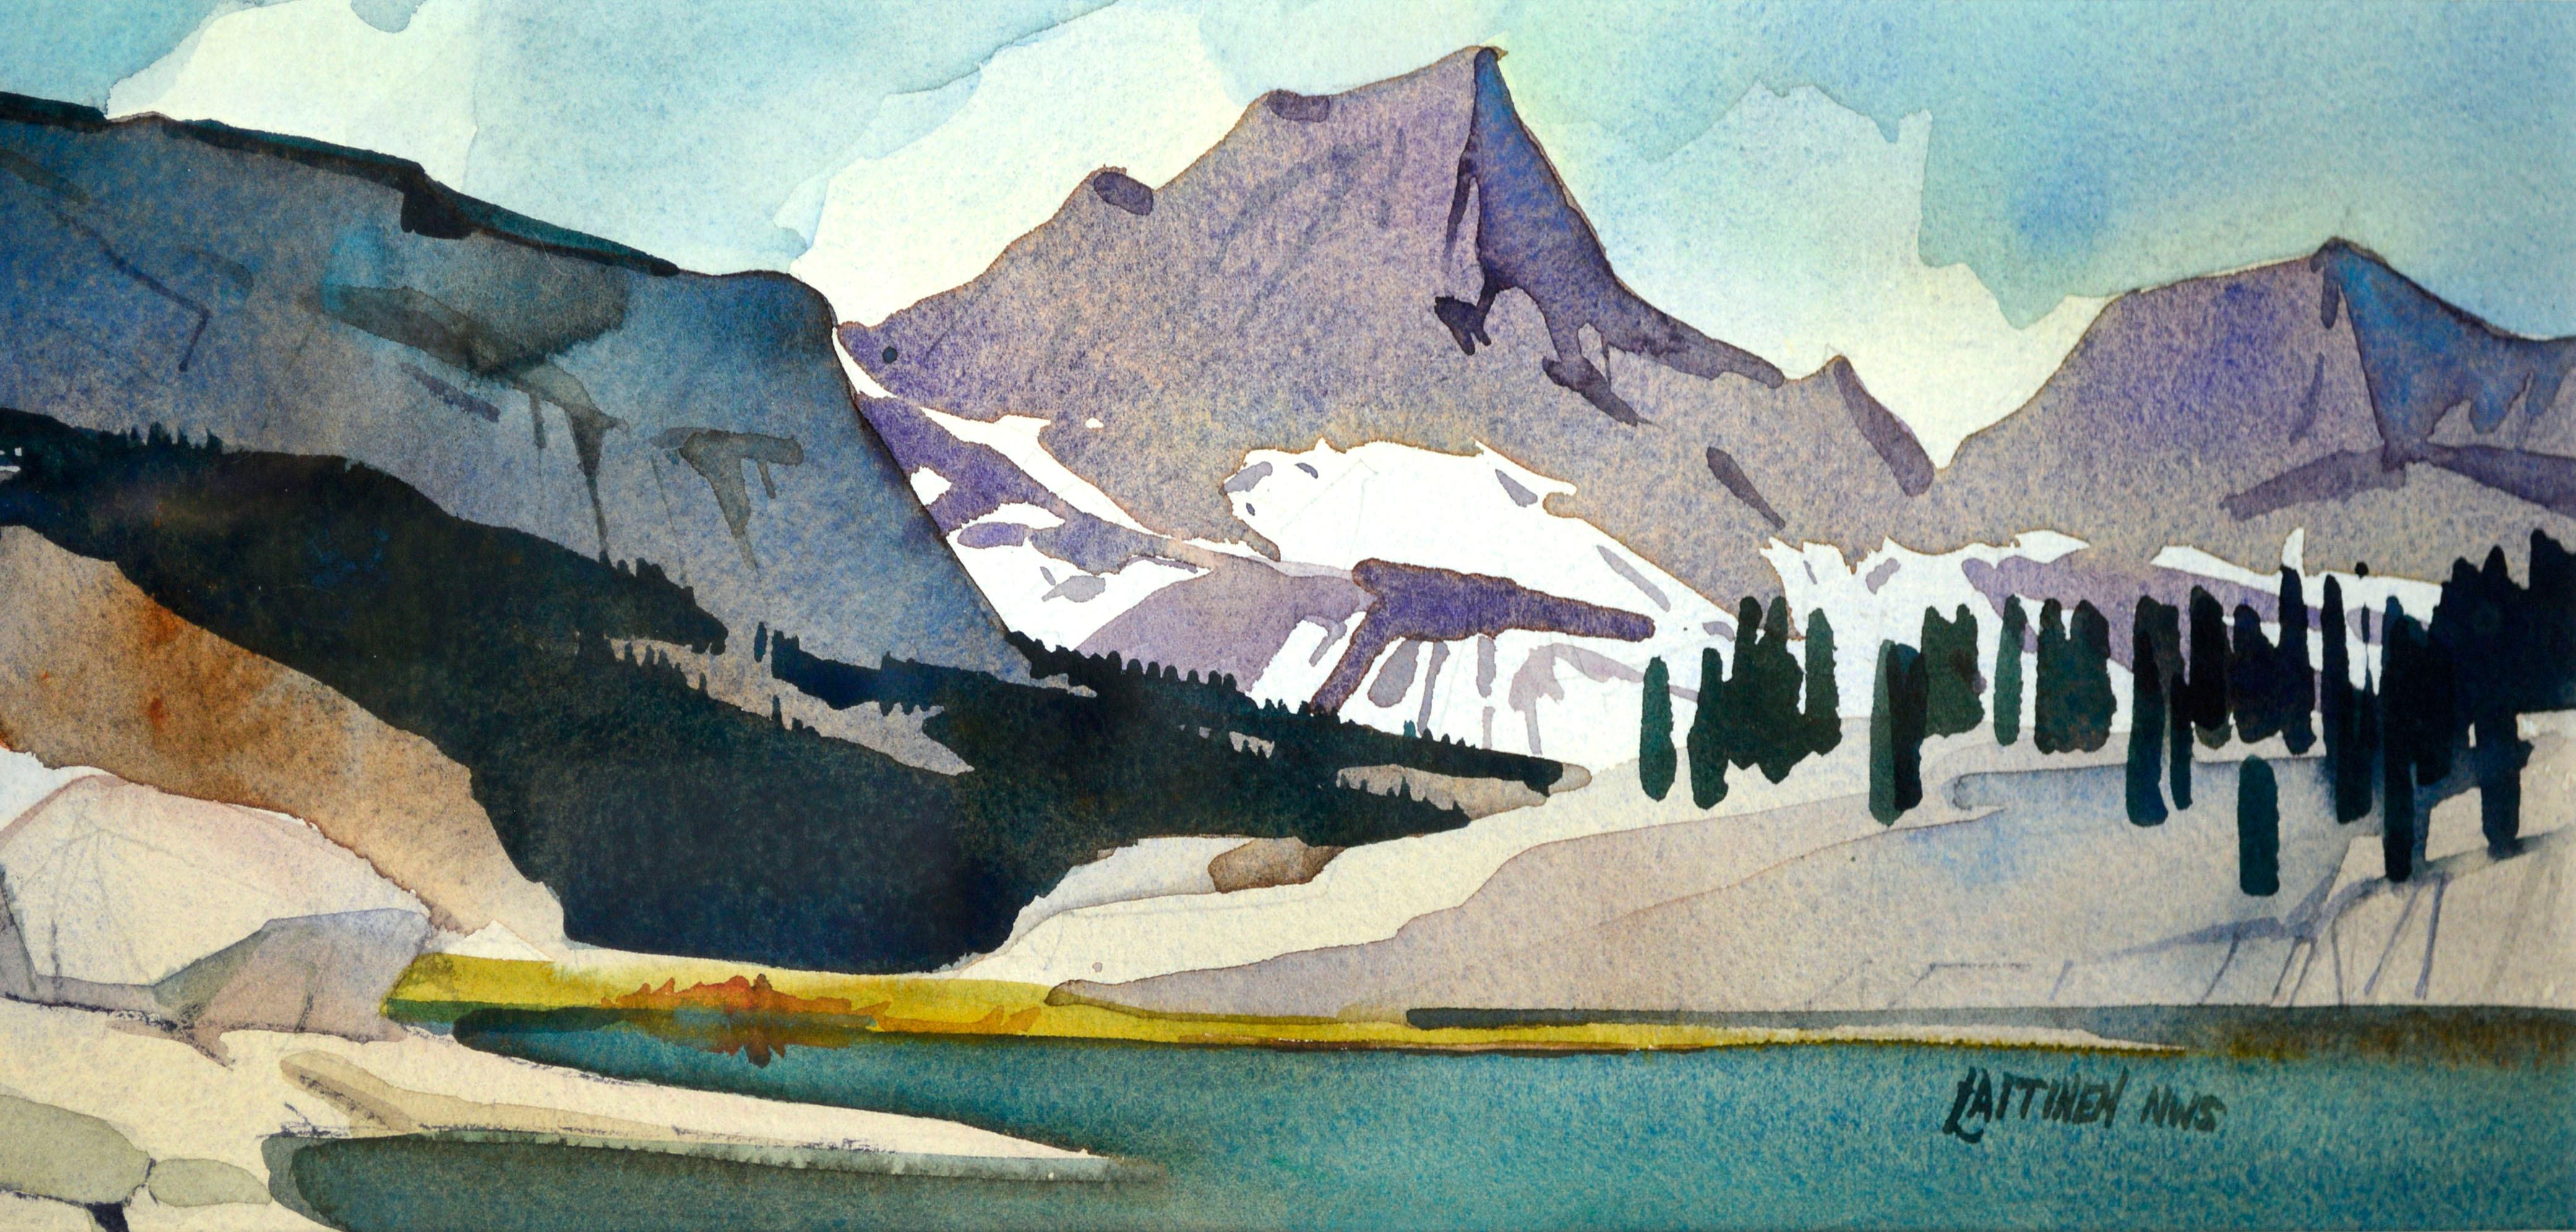 Sierra Mountain Peak Lake, Panoramic Landscape Watercolor by National Watercolor Society artist Dale Laitinen 

Beautiful late 20th century landscape watercolor by Dale Laitinen (American, b.20th Century), c.1990's. In this panoramic scene, a